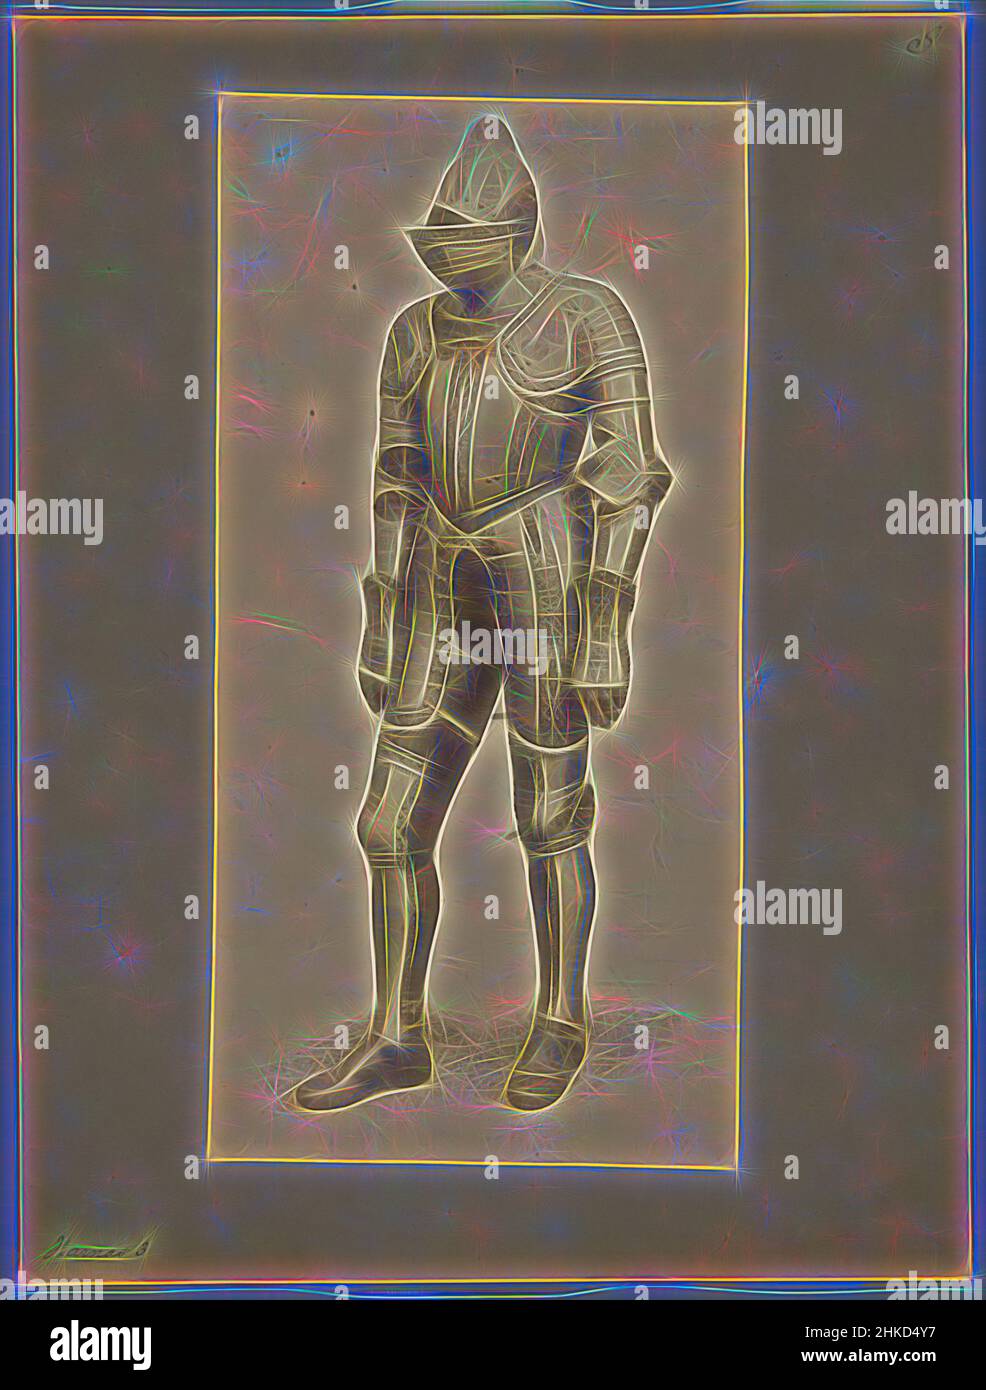 Inspired by Armor with helmet, 1850 - 1900, albumen print, height 344 mm × width 259 mm, Reimagined by Artotop. Classic art reinvented with a modern twist. Design of warm cheerful glowing of brightness and light ray radiance. Photography inspired by surrealism and futurism, embracing dynamic energy of modern technology, movement, speed and revolutionize culture Stock Photo